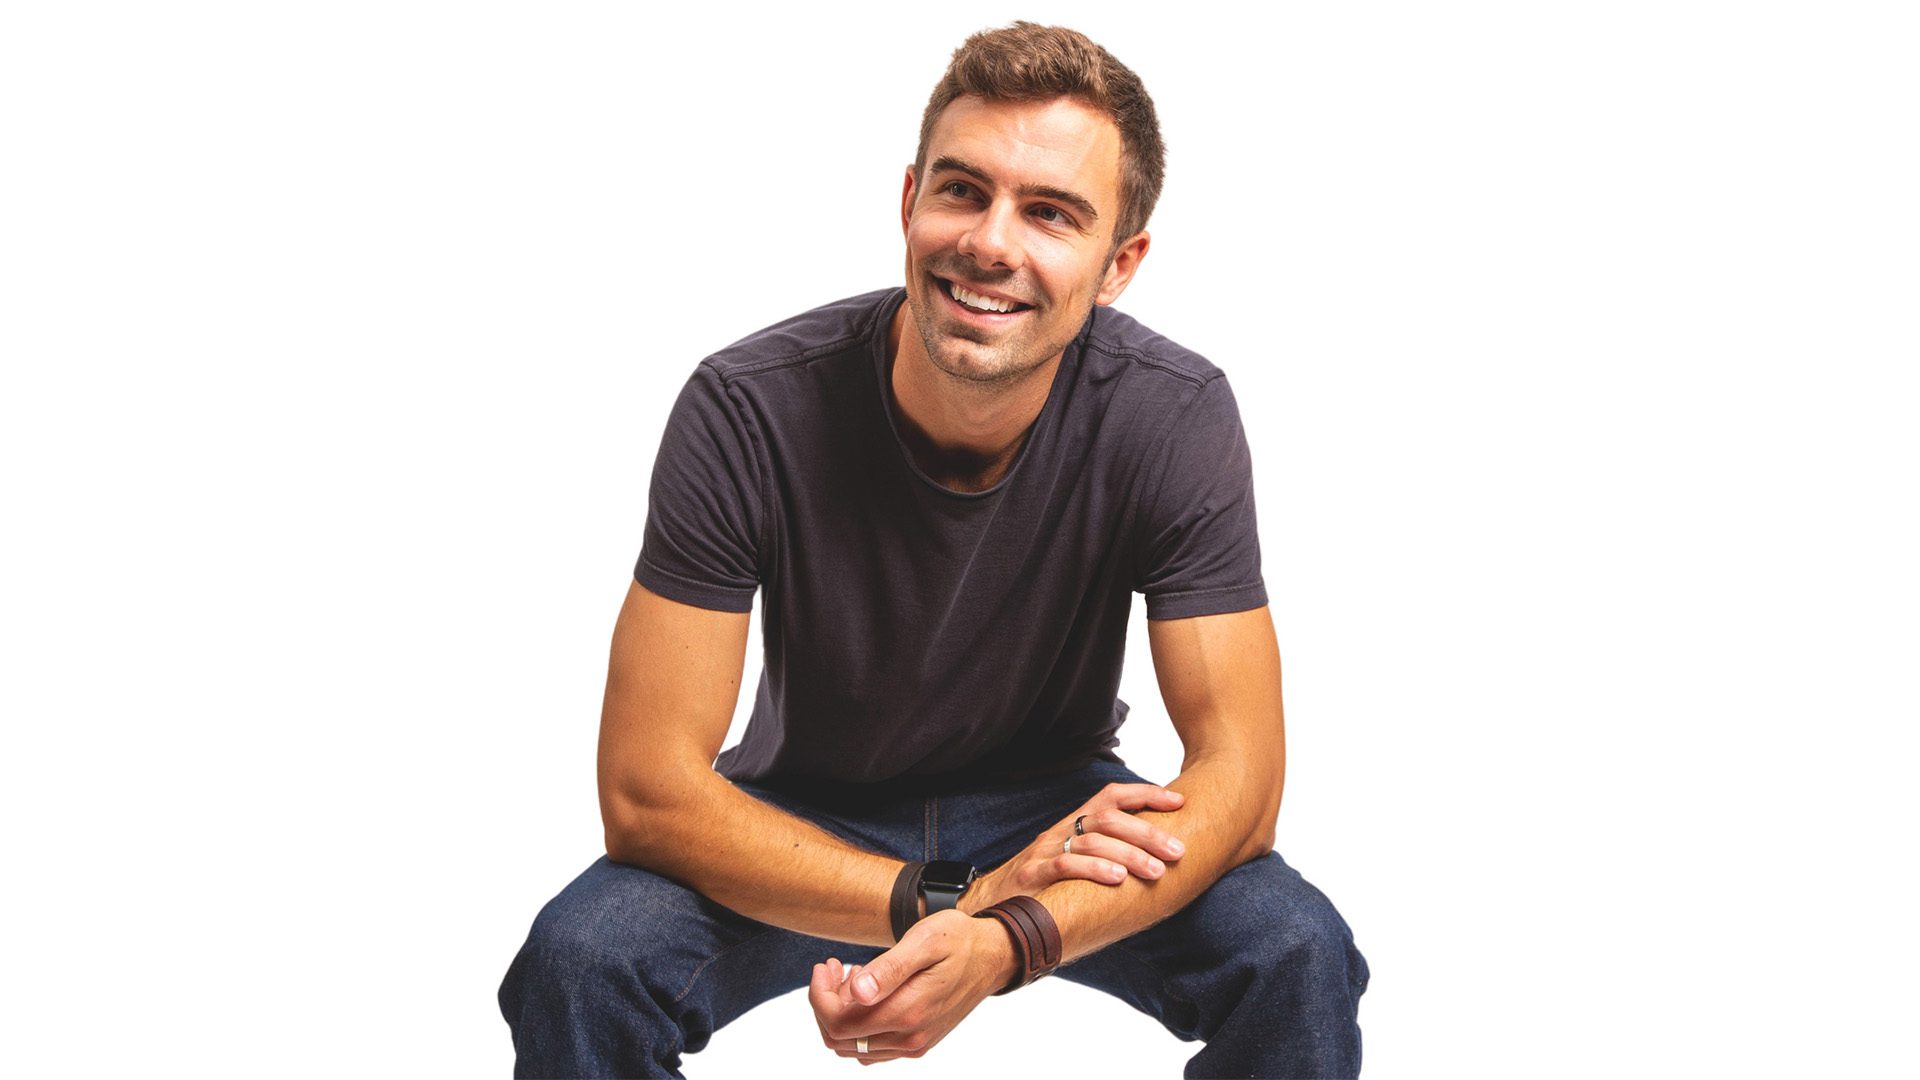 Kevin Martin, the co-founder of sustainable jean company unspun